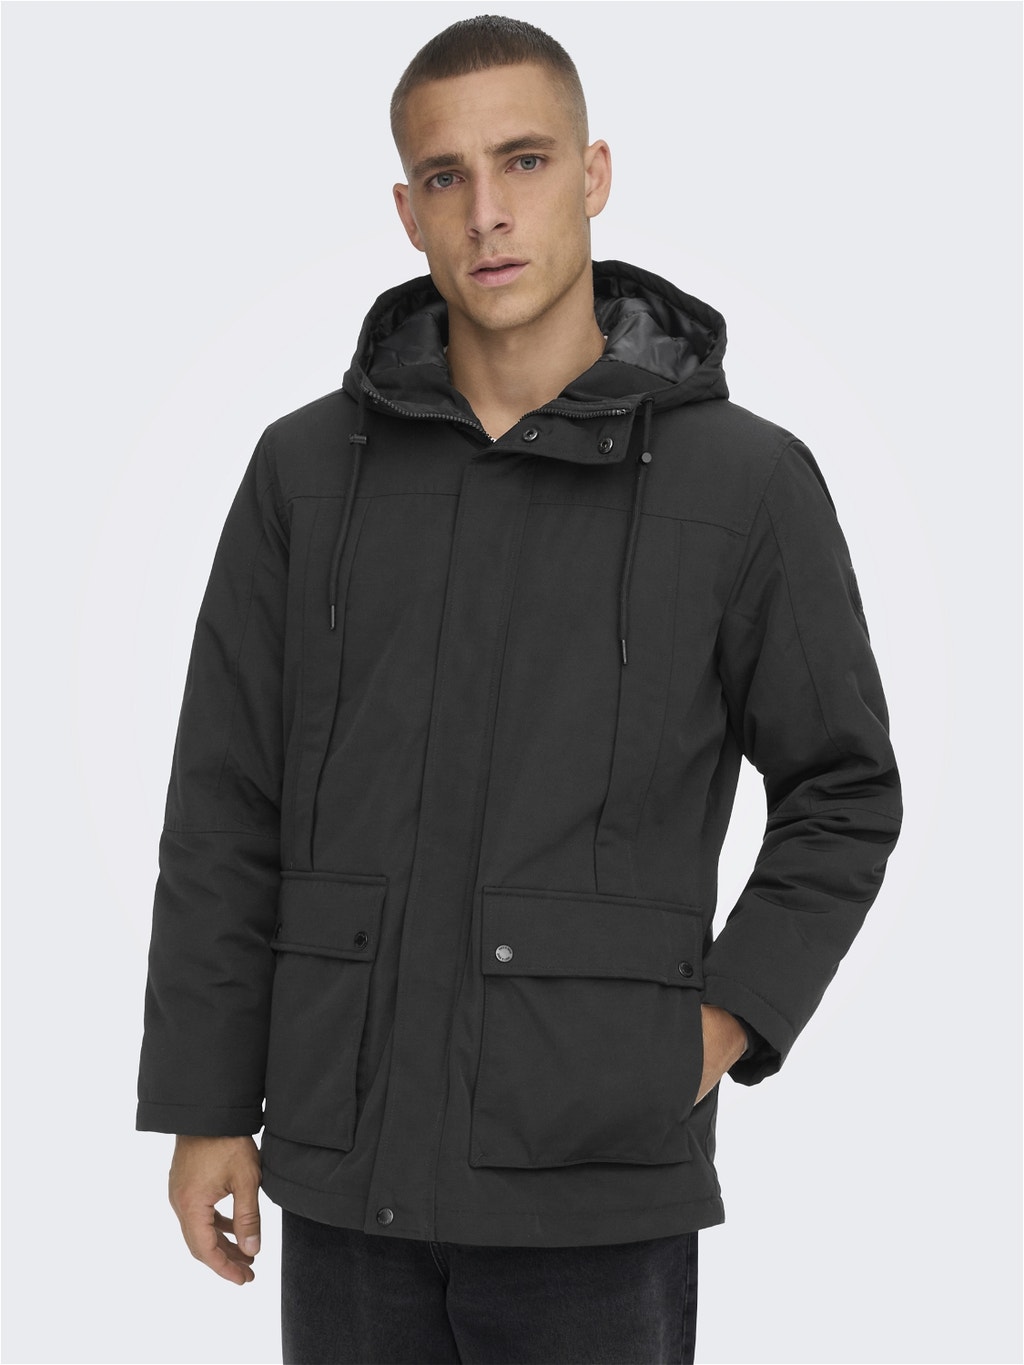 Mucho tubería Tienda Parka jacket with hood with 40% discount! | ONLY & SONS®